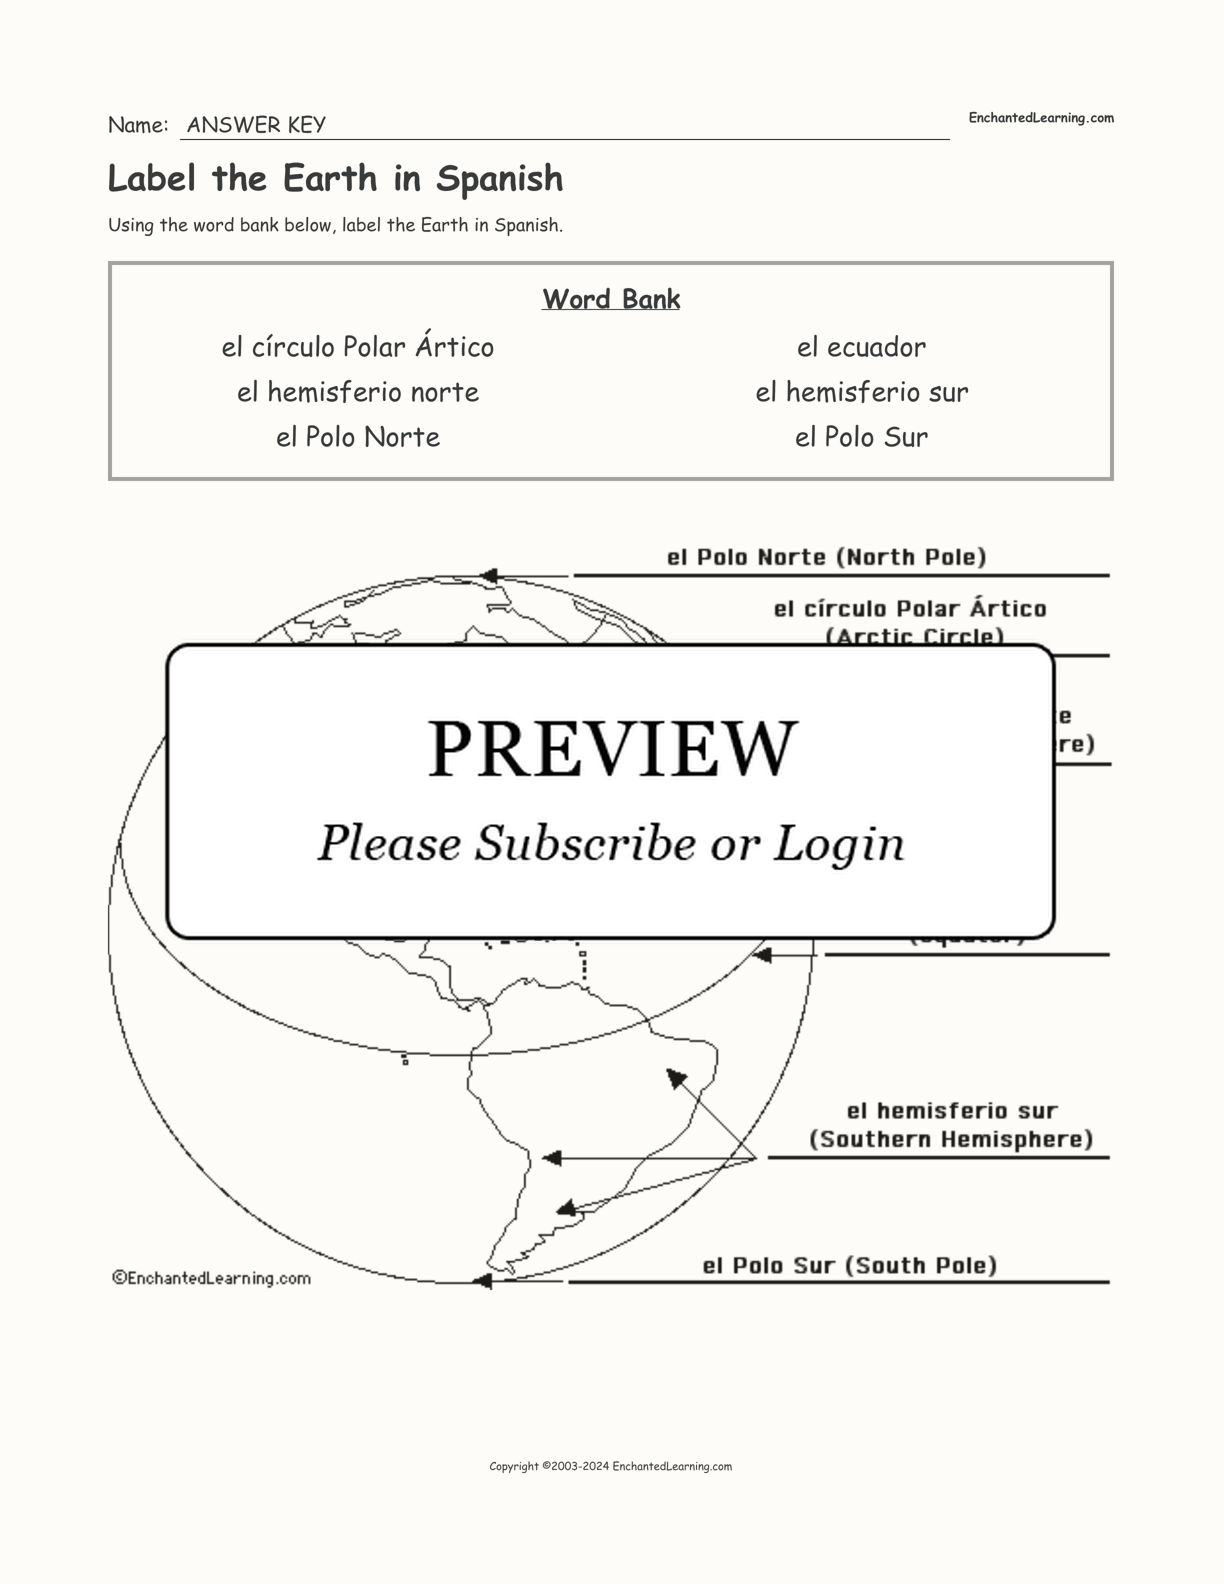 Label the Earth in Spanish interactive worksheet page 2